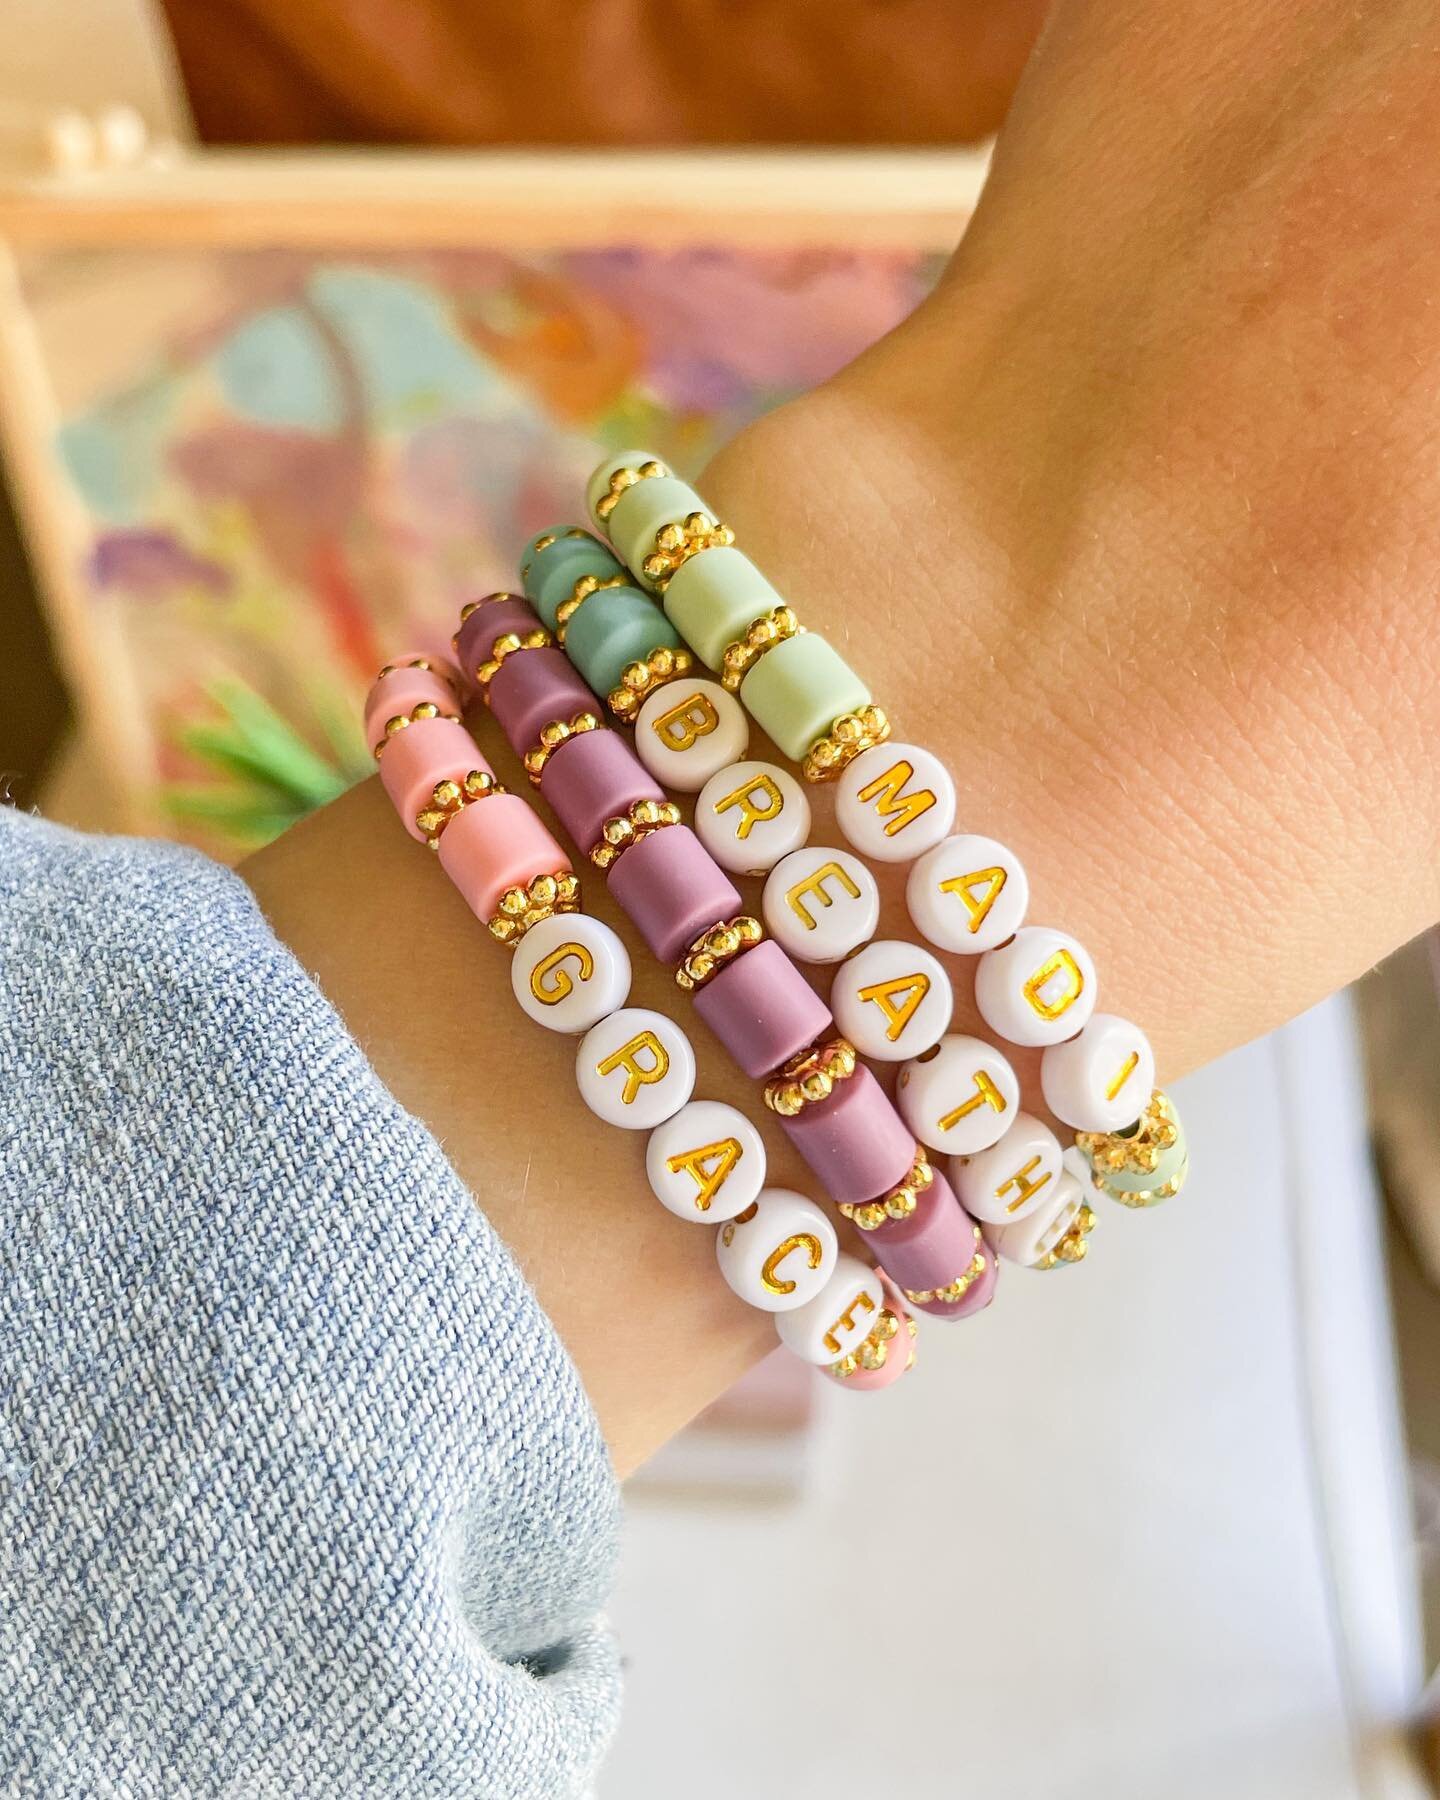 Coming soon! Chunky clay bracelets! These have the comfort of my OG Heishi bands and some bling with gold-plated daisy spacers ✨ I&rsquo;ve got lots of colorful and neutral options. ✿ light sage ✿ ocean blue ✿ lilac ✿ bubblegum pink ✿ vanilla cream ✿